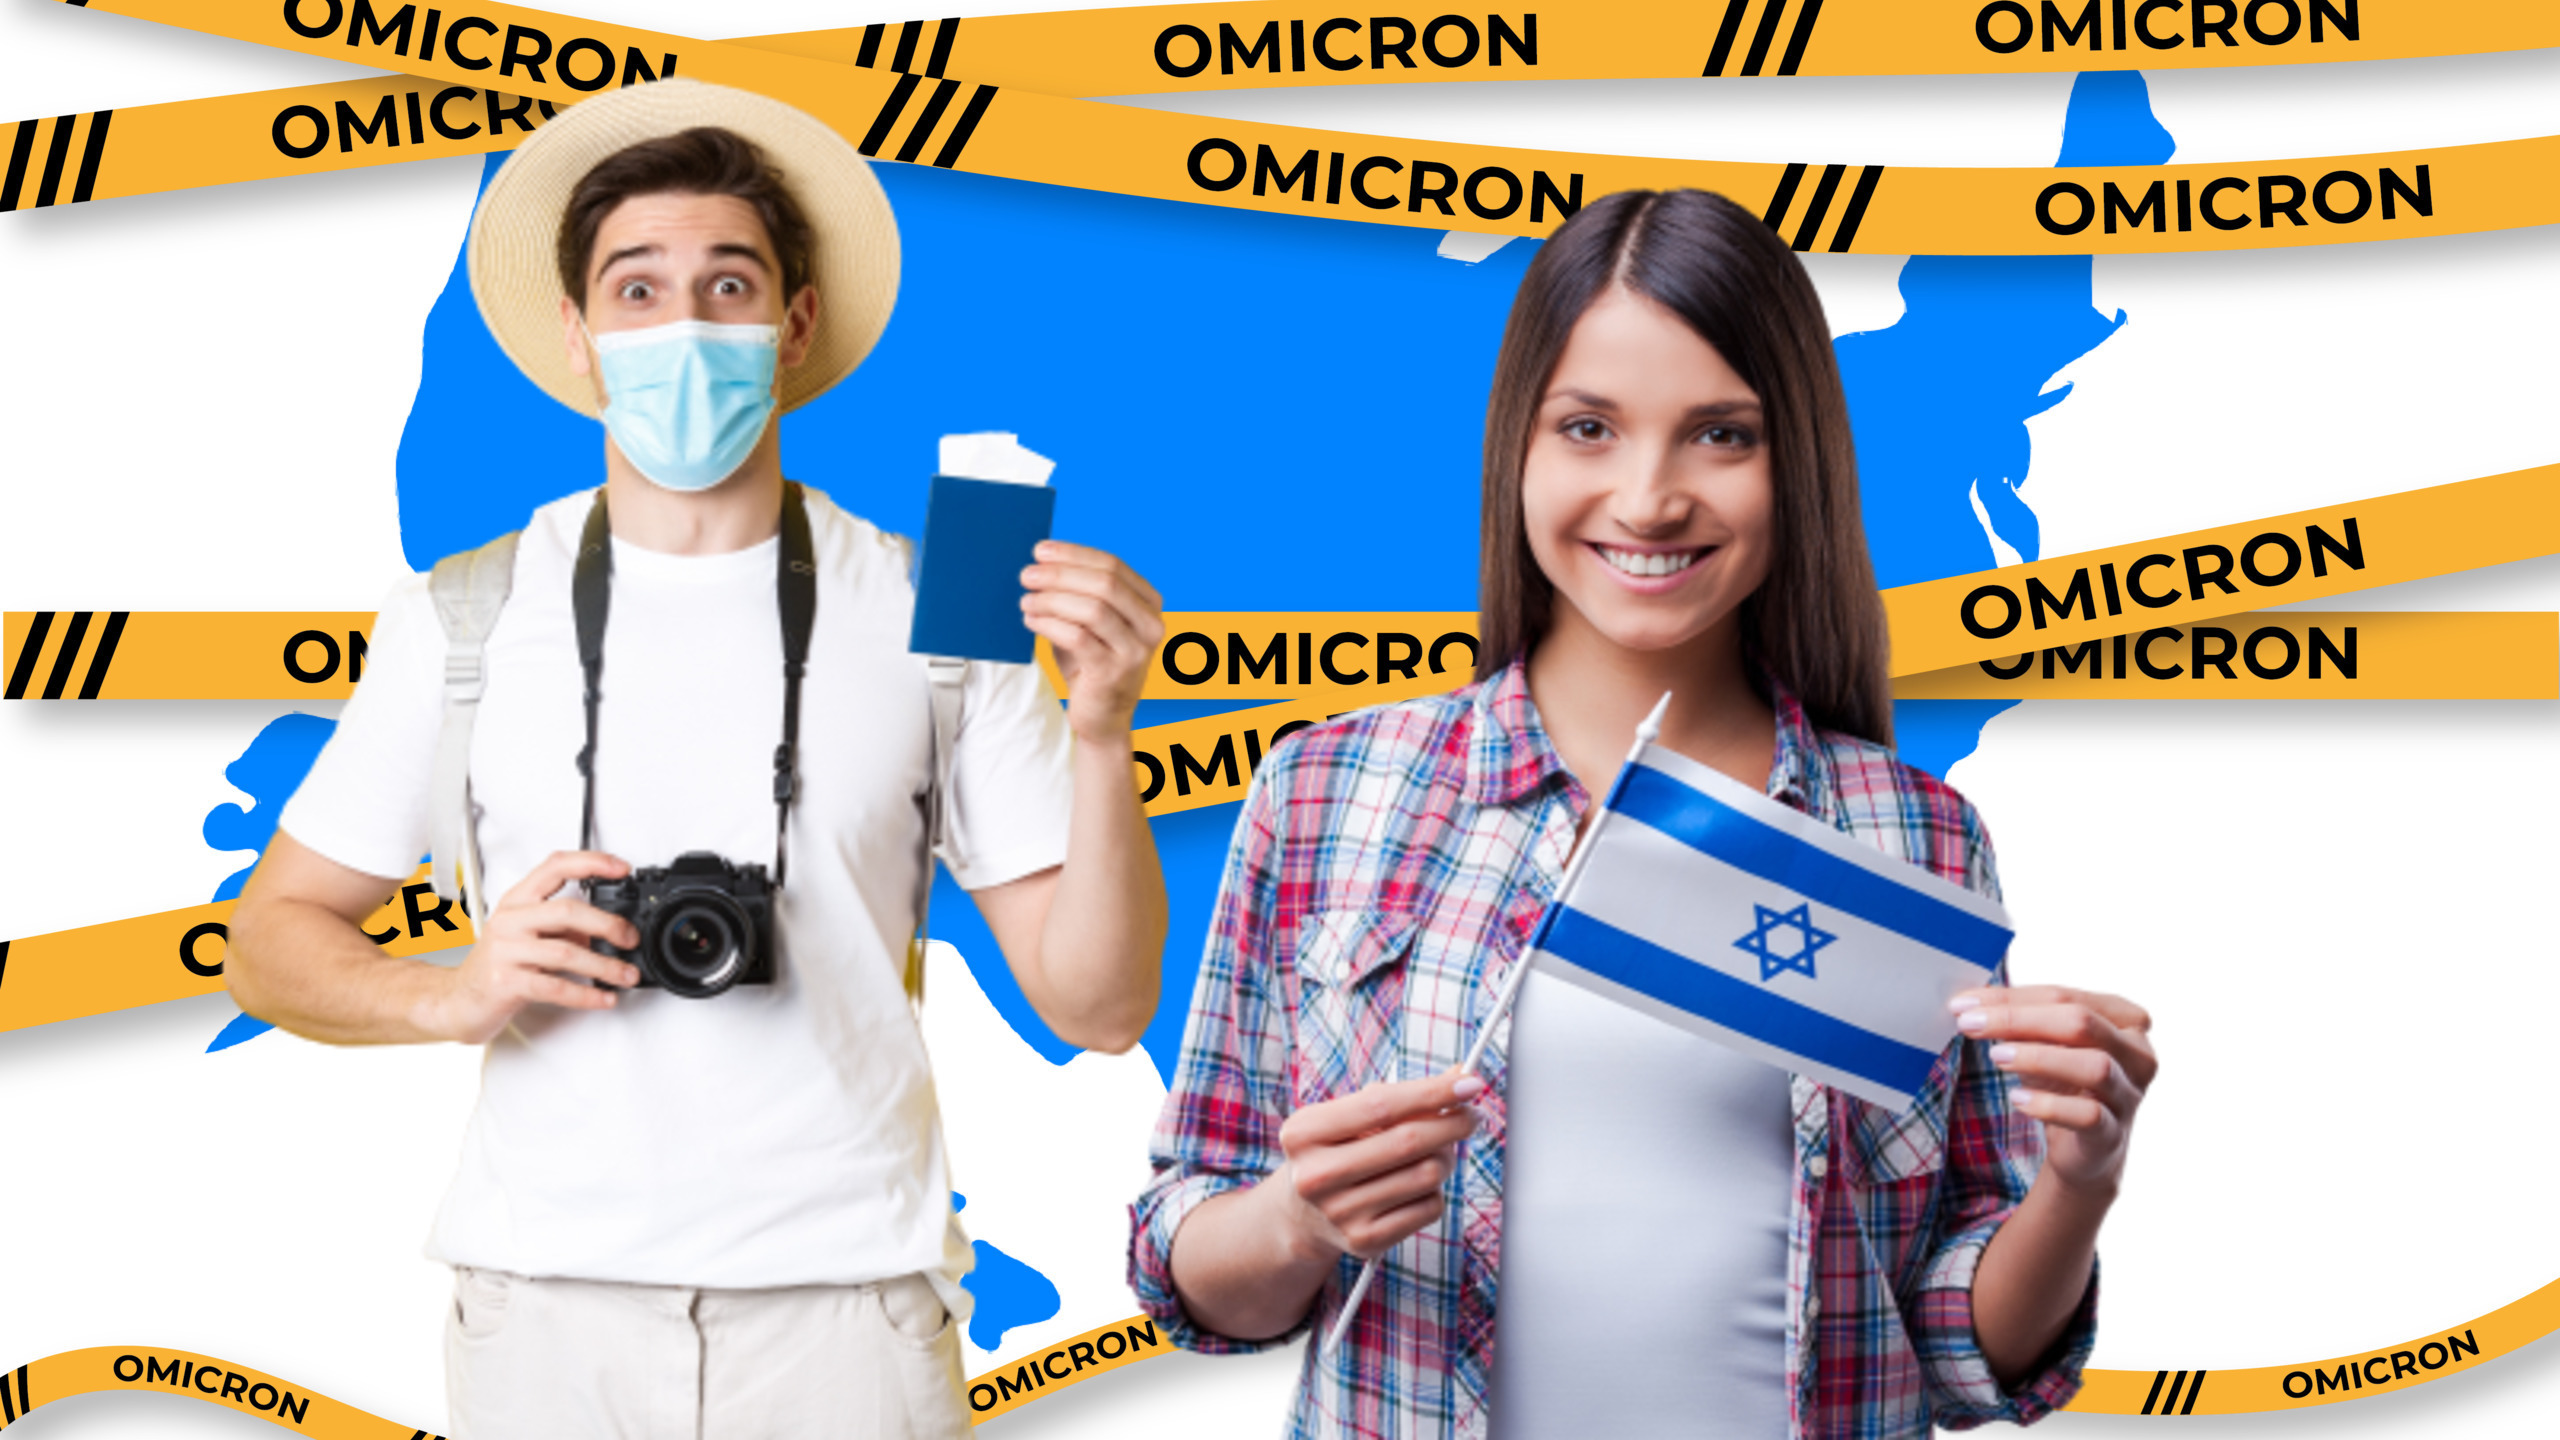 Incoming Americans Embark on Israel Excursion, Arrive at Airport Ahead of Omicron-Induced Embargo